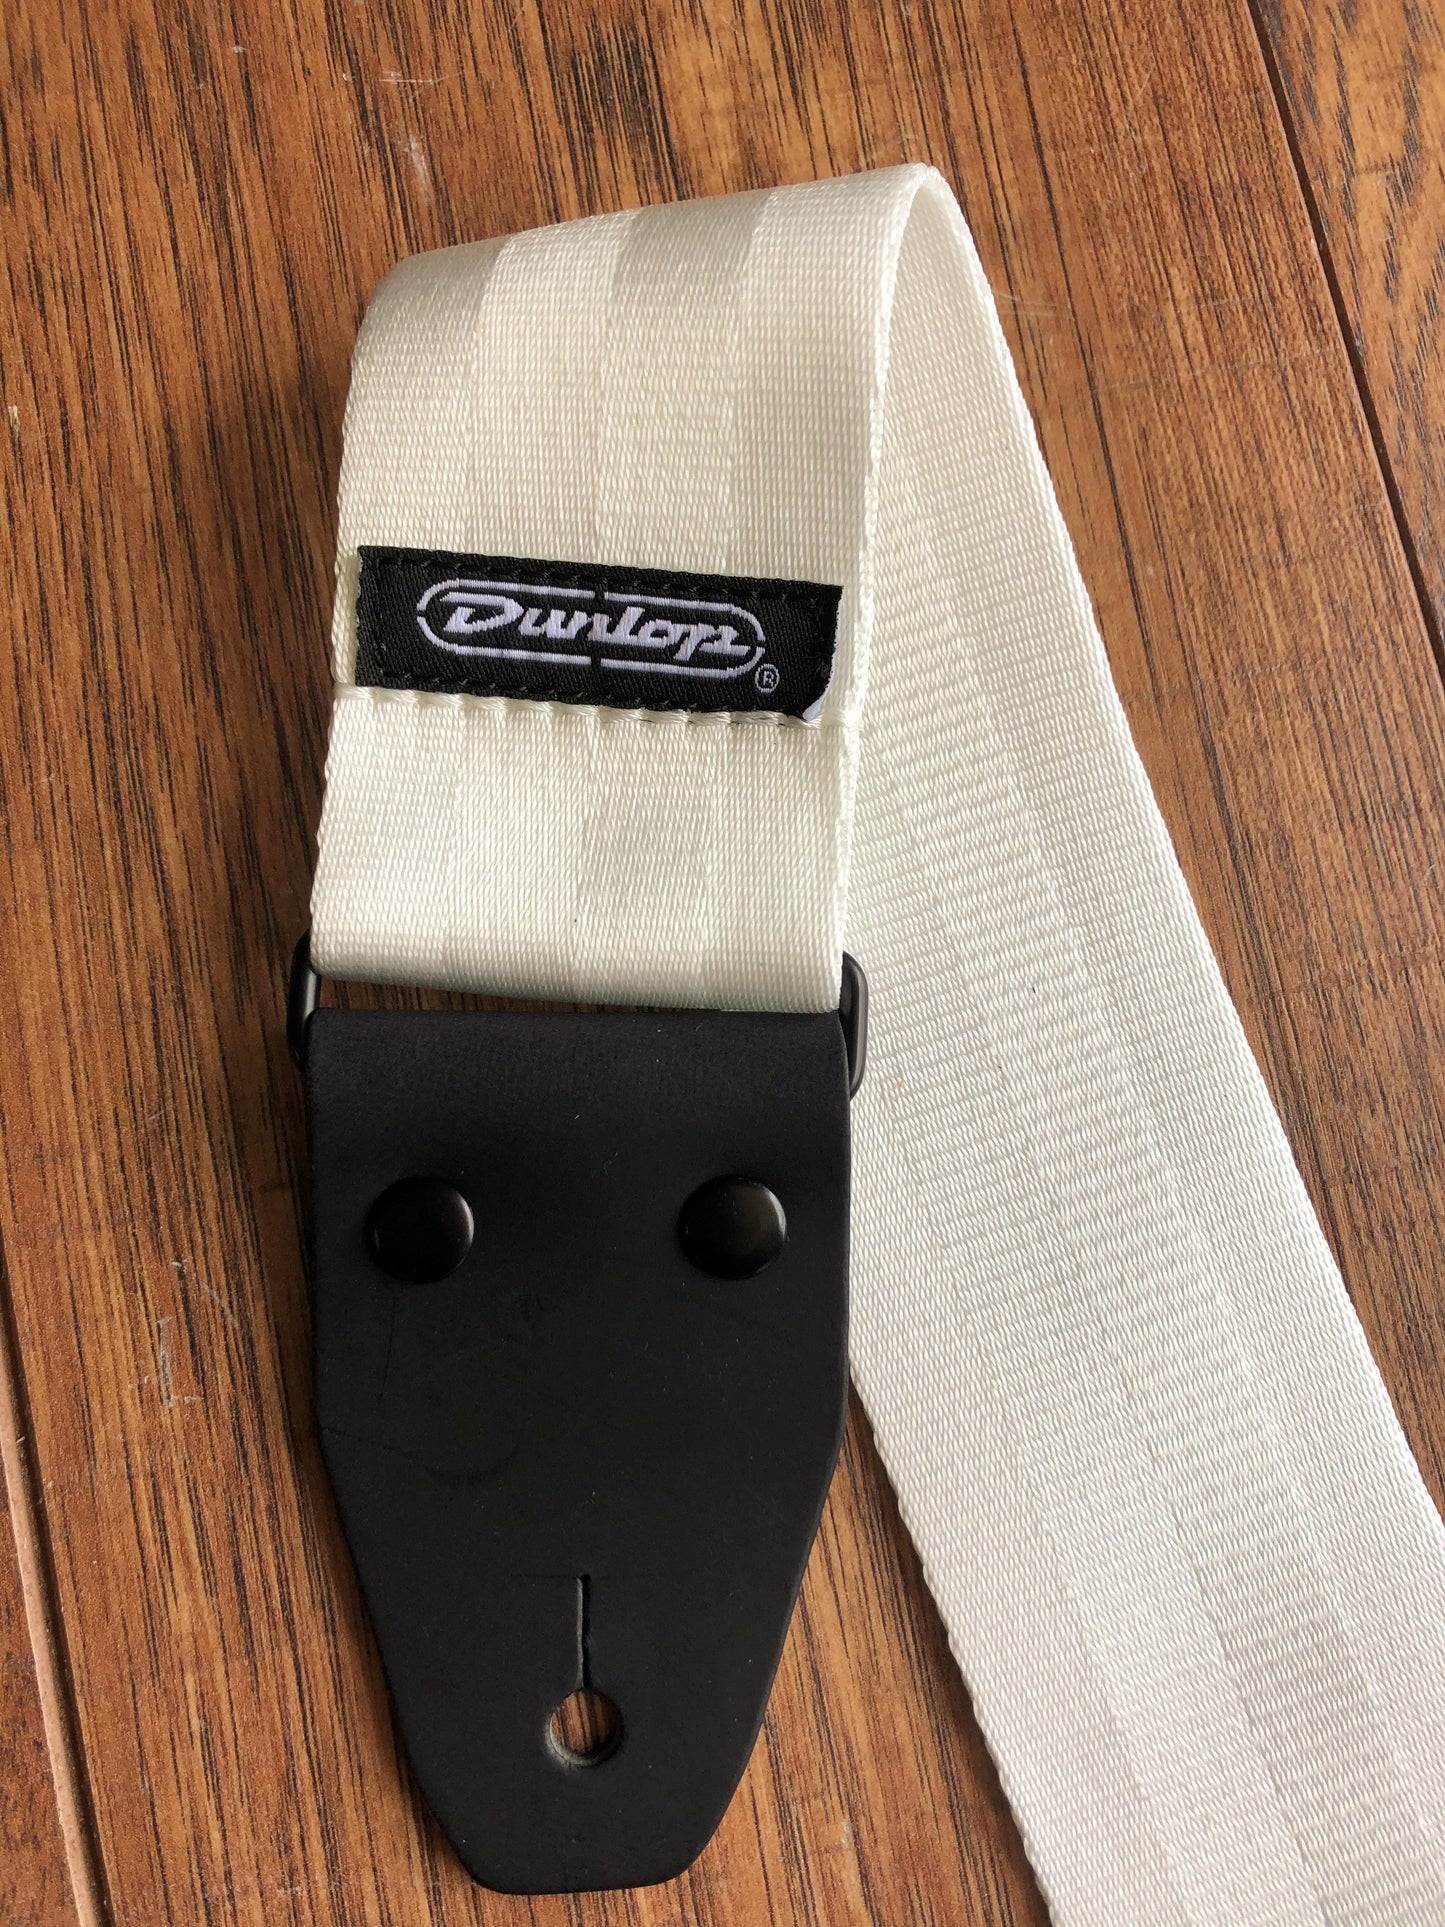 Dunlop DST7001WH Deluxe Seatbelt Guitar & Bass Strap White